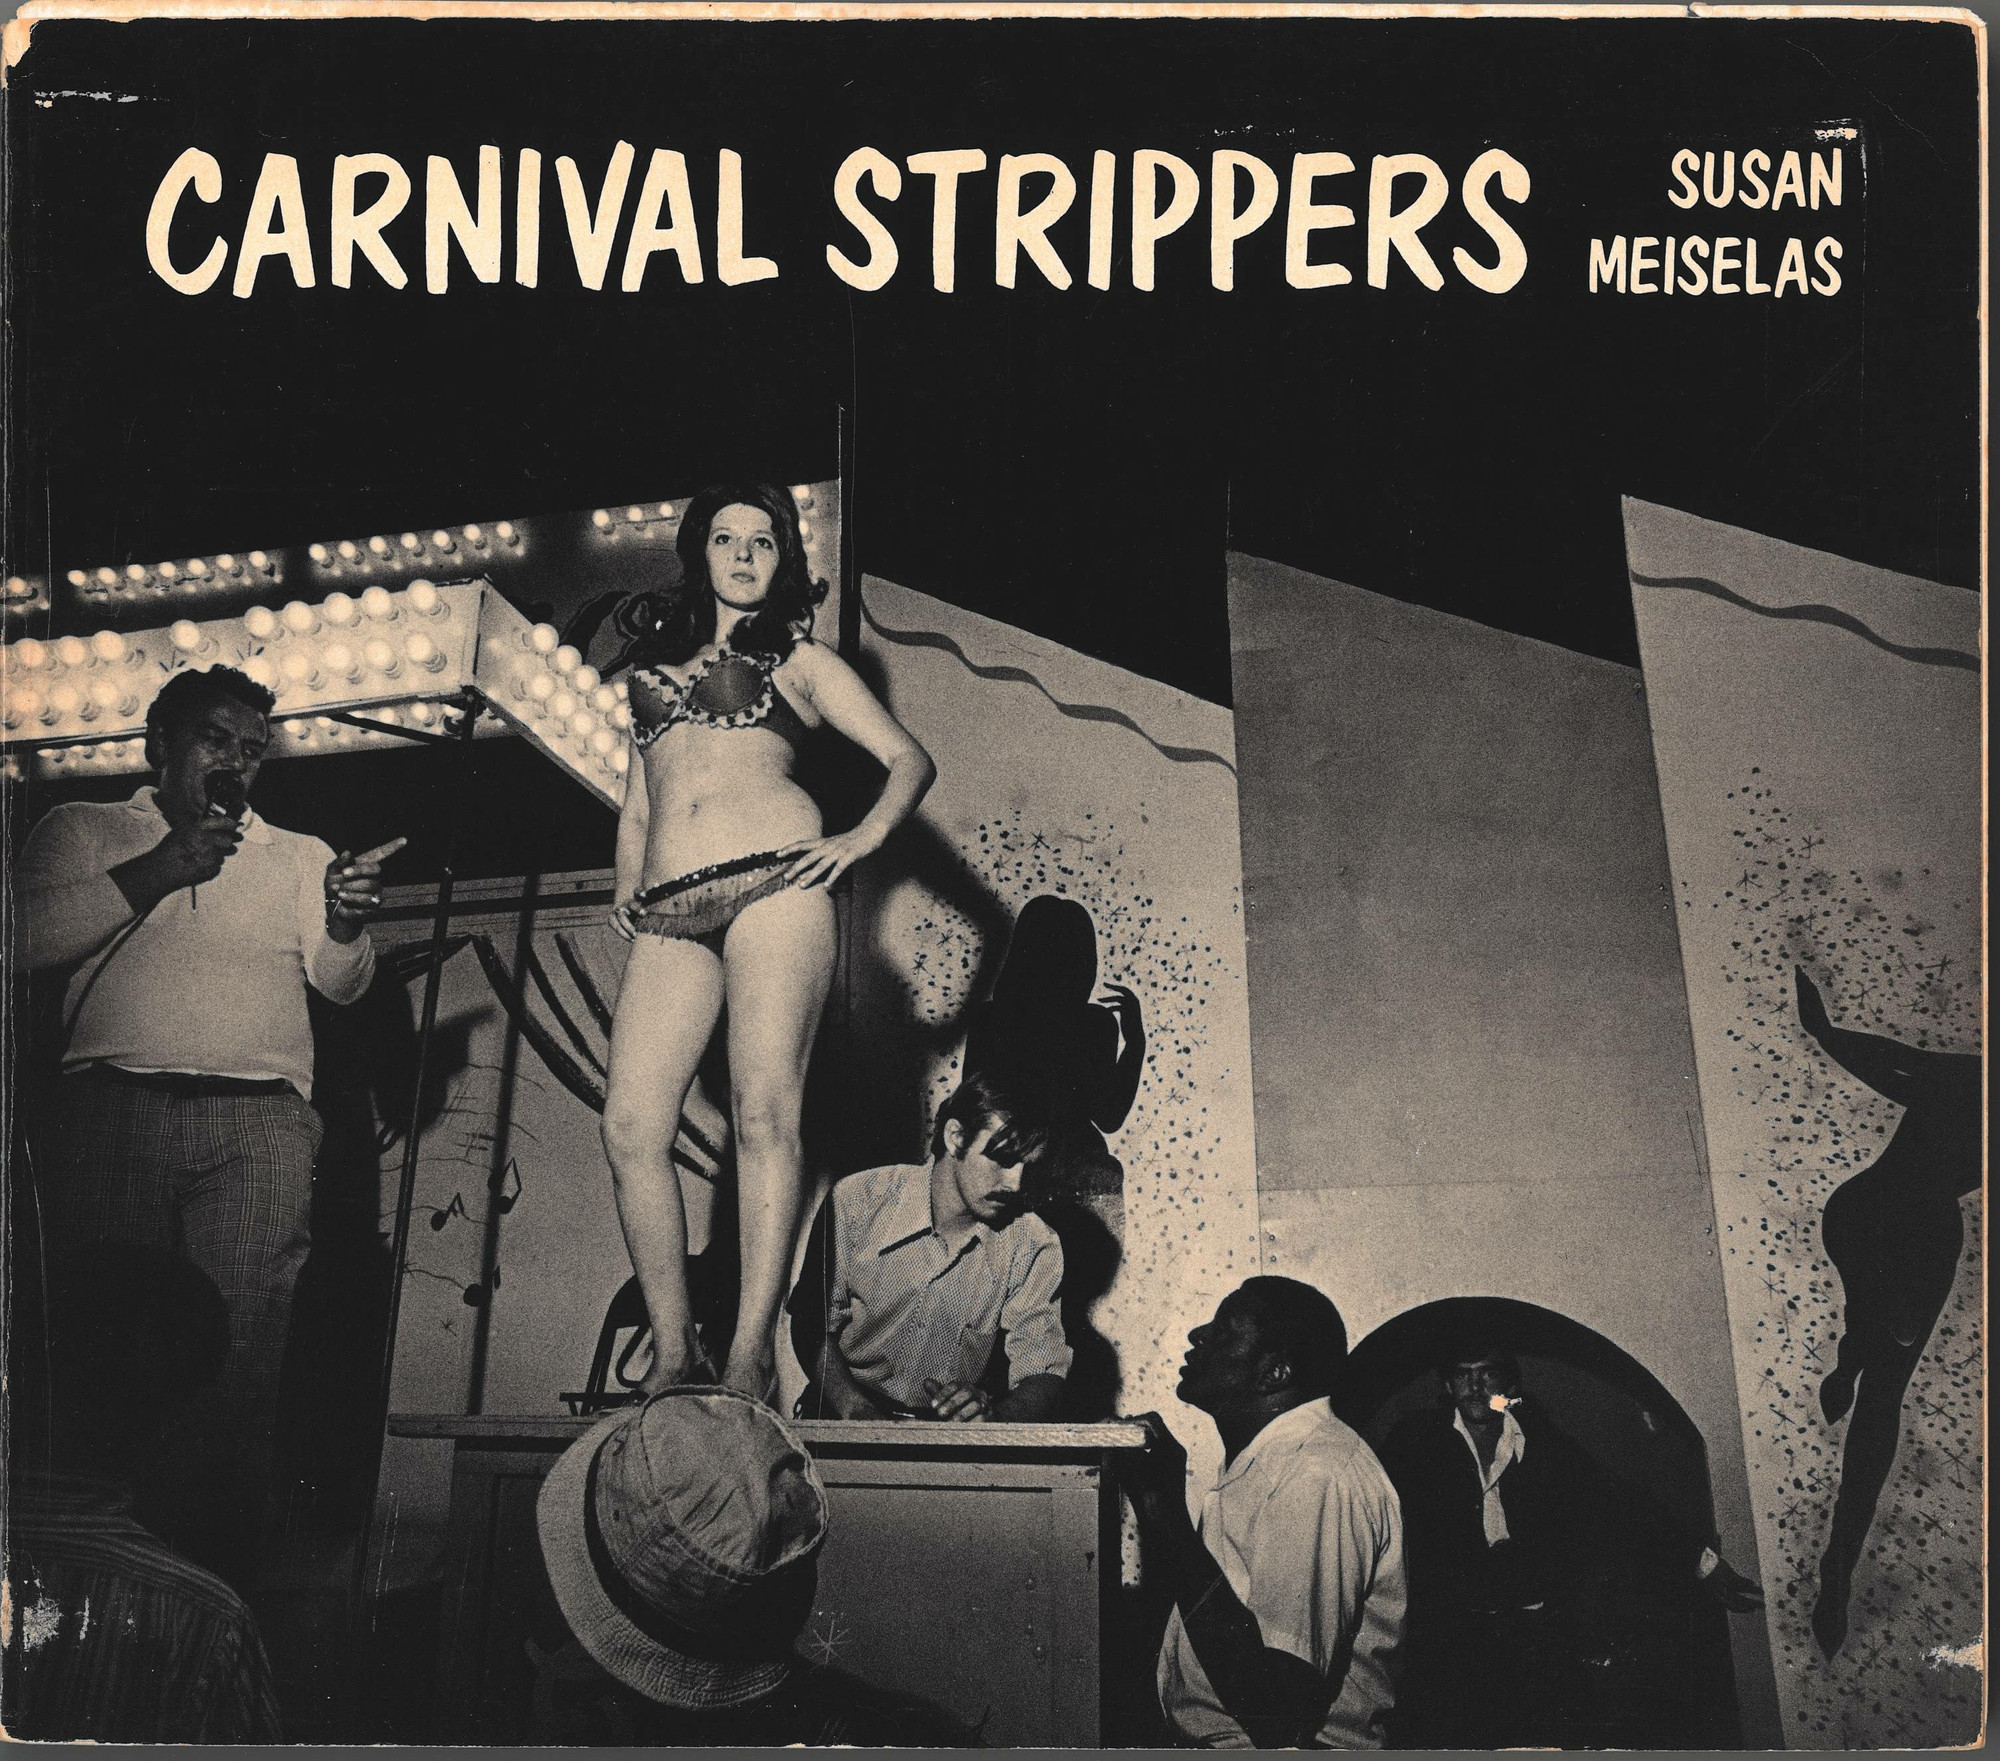 Susan Meiselas. Cover of the book *Carnival Strippers*. 1976. New York: Farrar, Straus and Giroux. The Museum of Modern Art Library, New York. © 2022 Susan Meiselas
